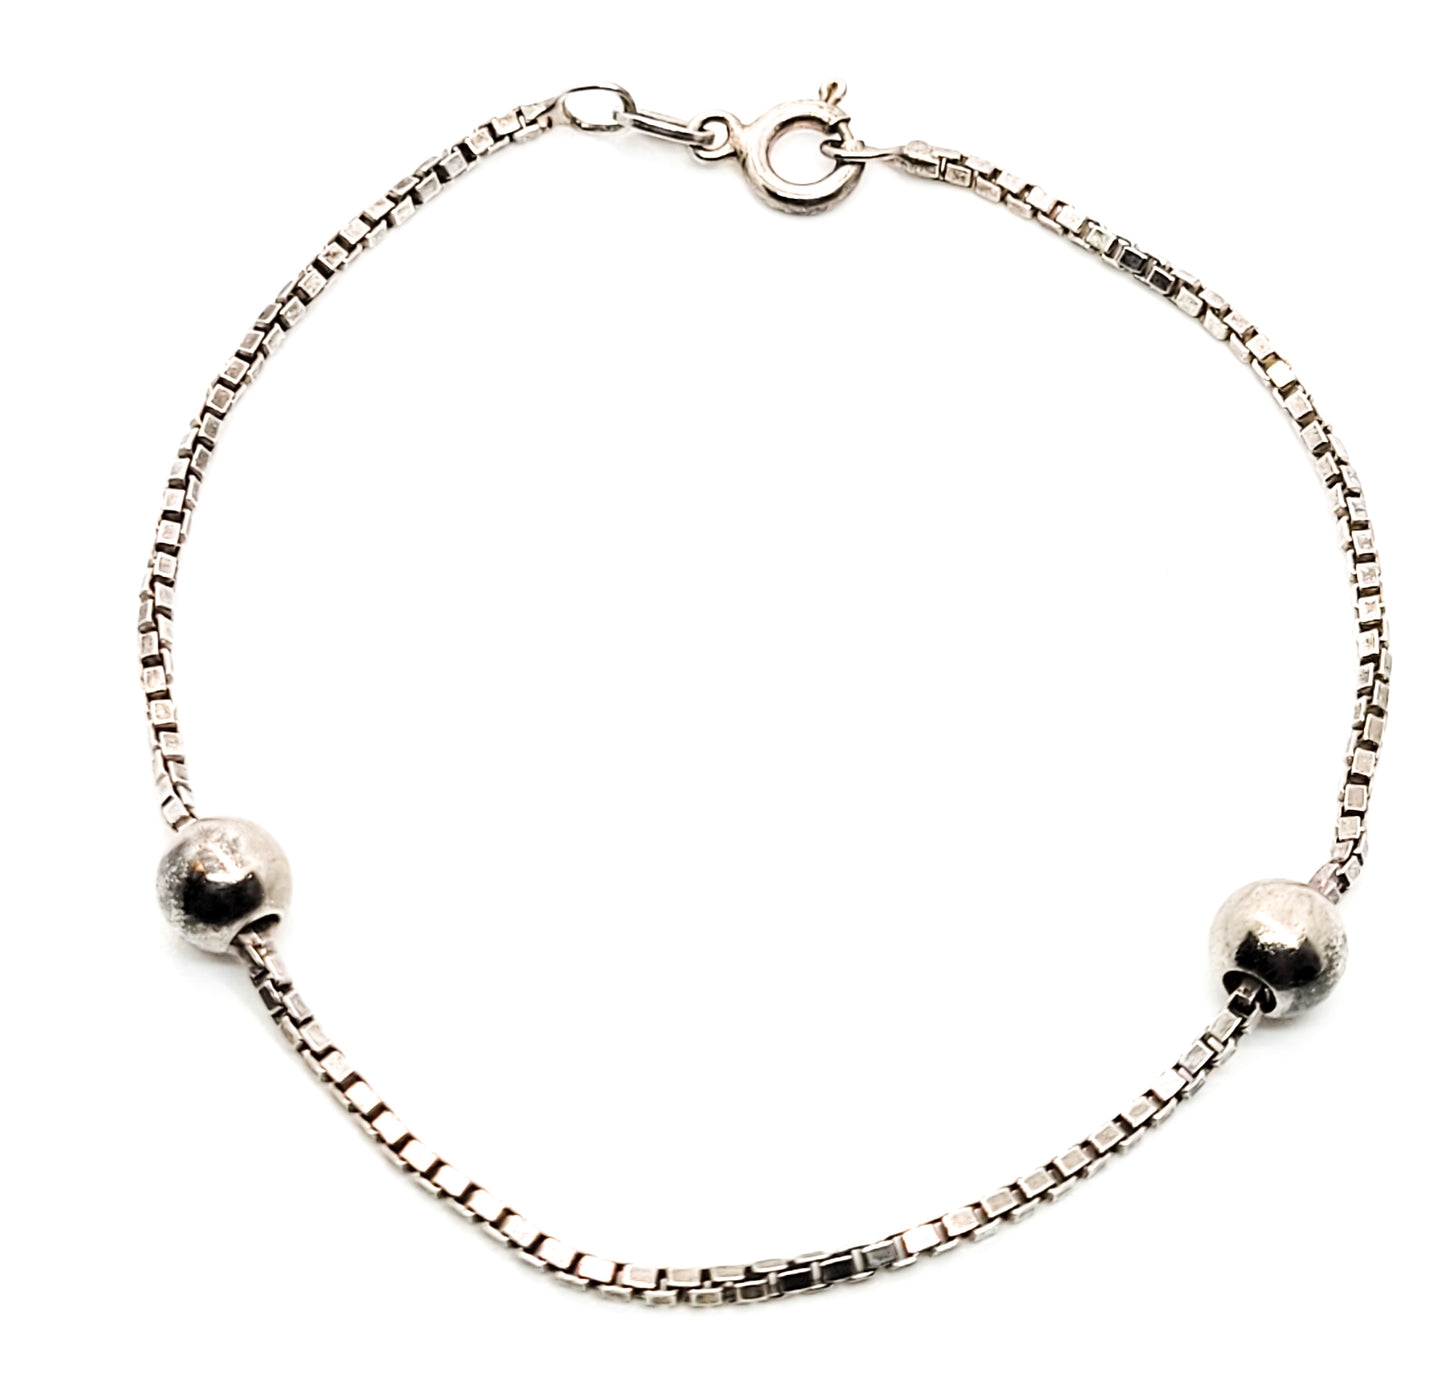 SU sterling silver box chain with floating 6mm sterling bead accents 925